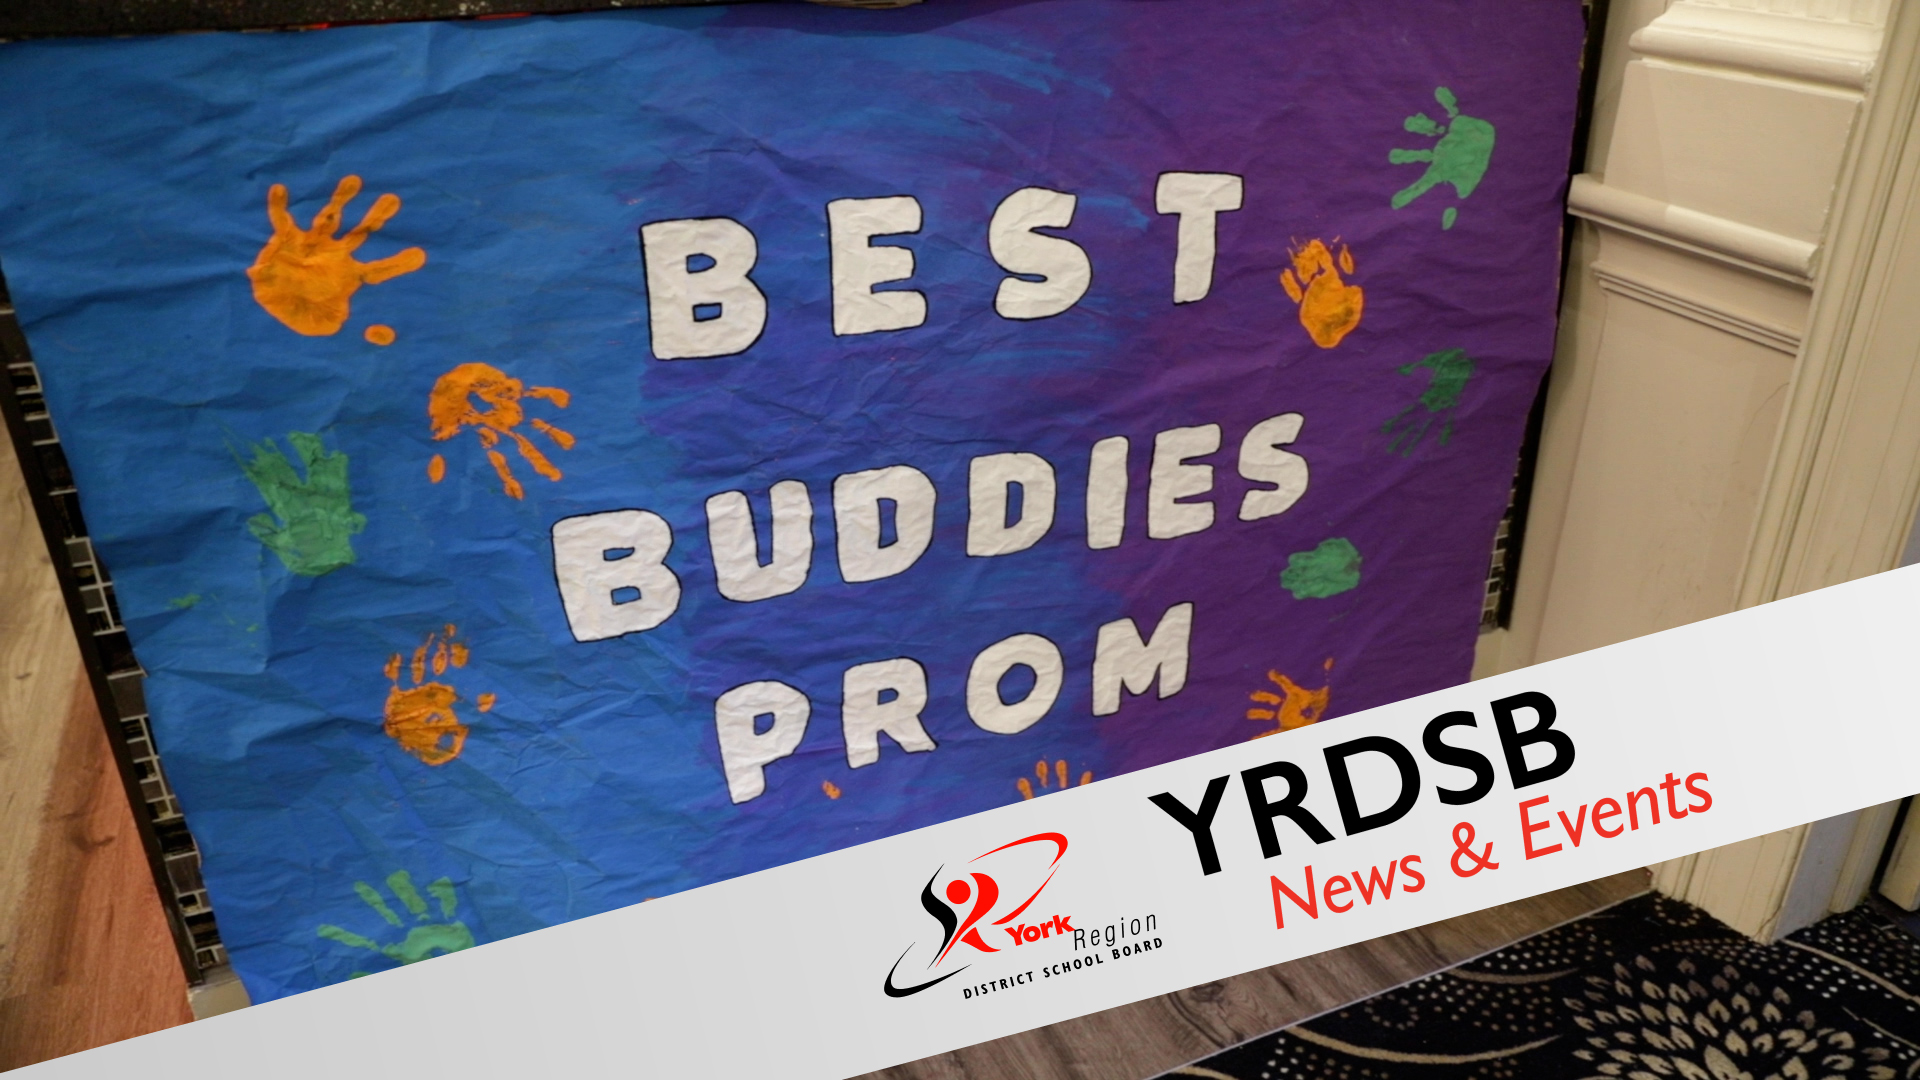 Blue background covered in orange and green handprints reads Best Buddies Prom